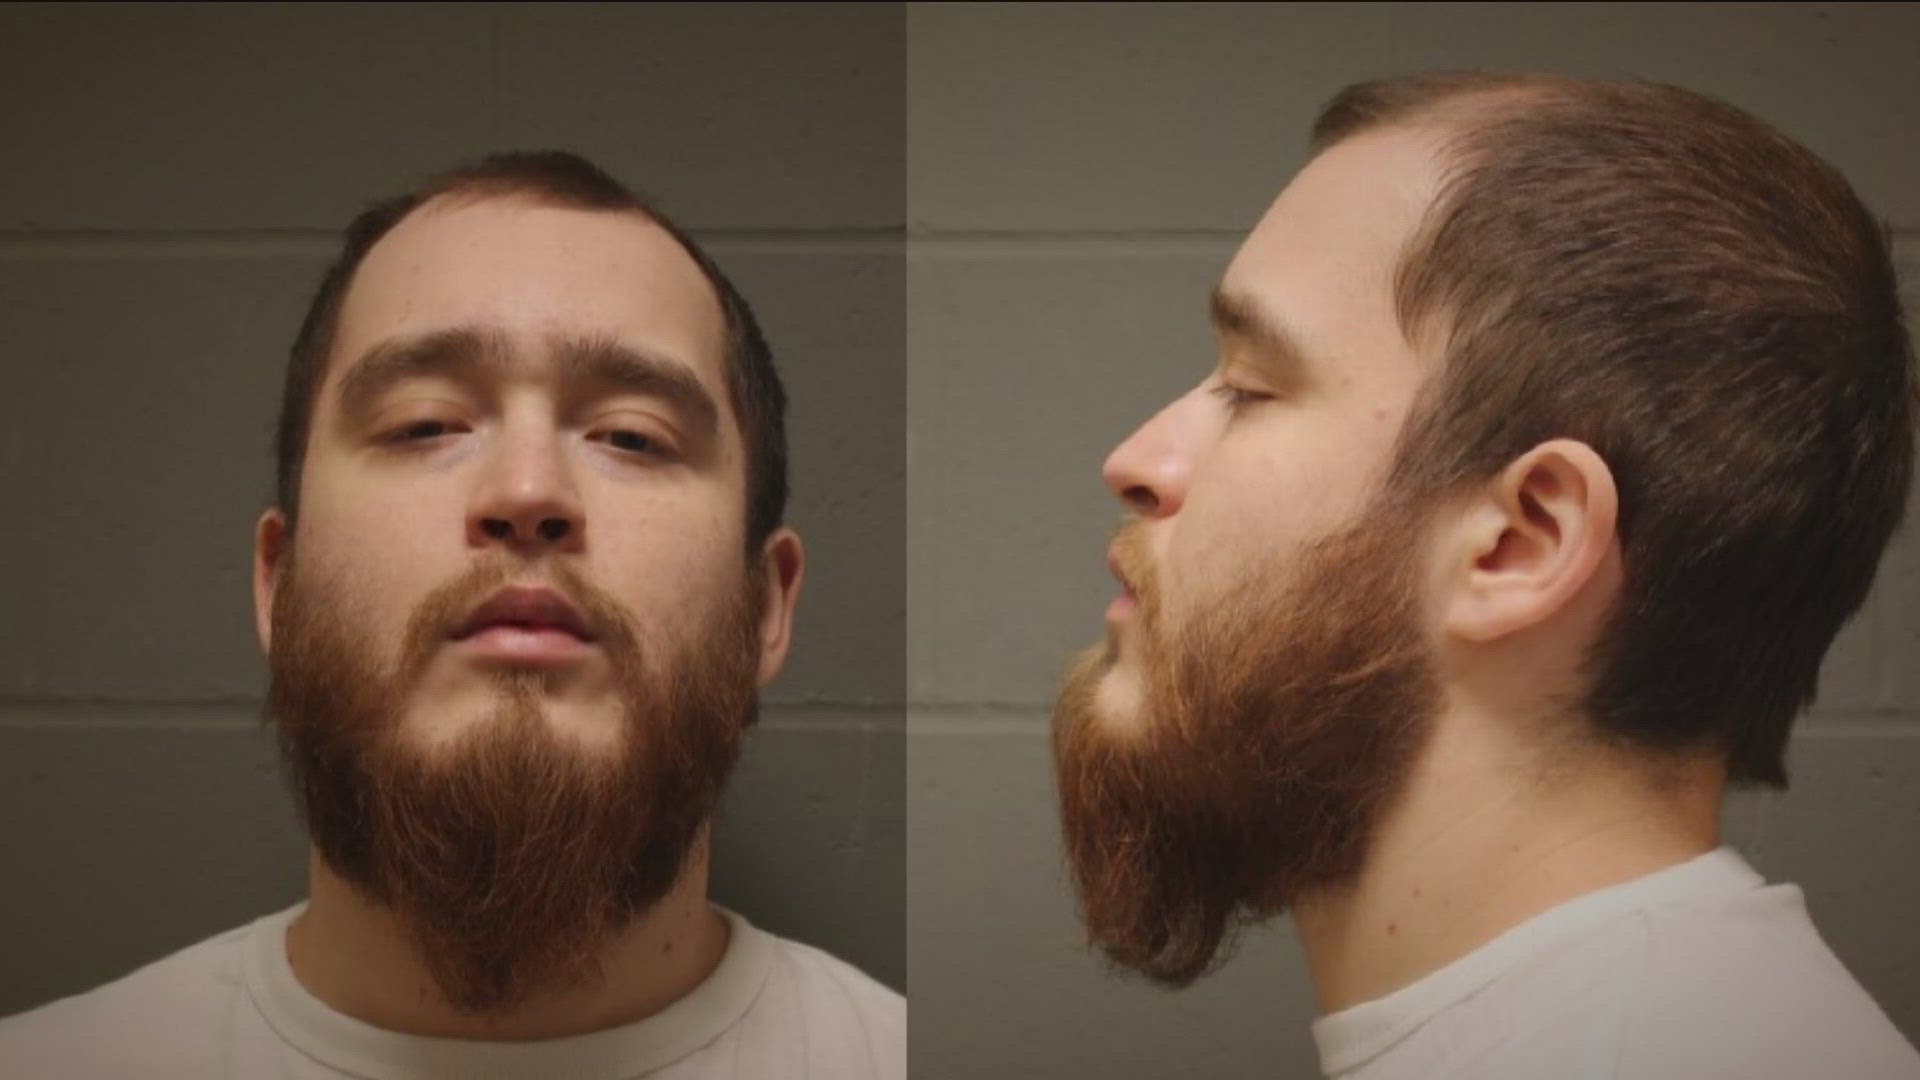 The Minnesota Court of Appeals ruled statements from suspect Cody Fohrenkam were obtained while he was being illegally detained for the killing of Deshaun Hill.